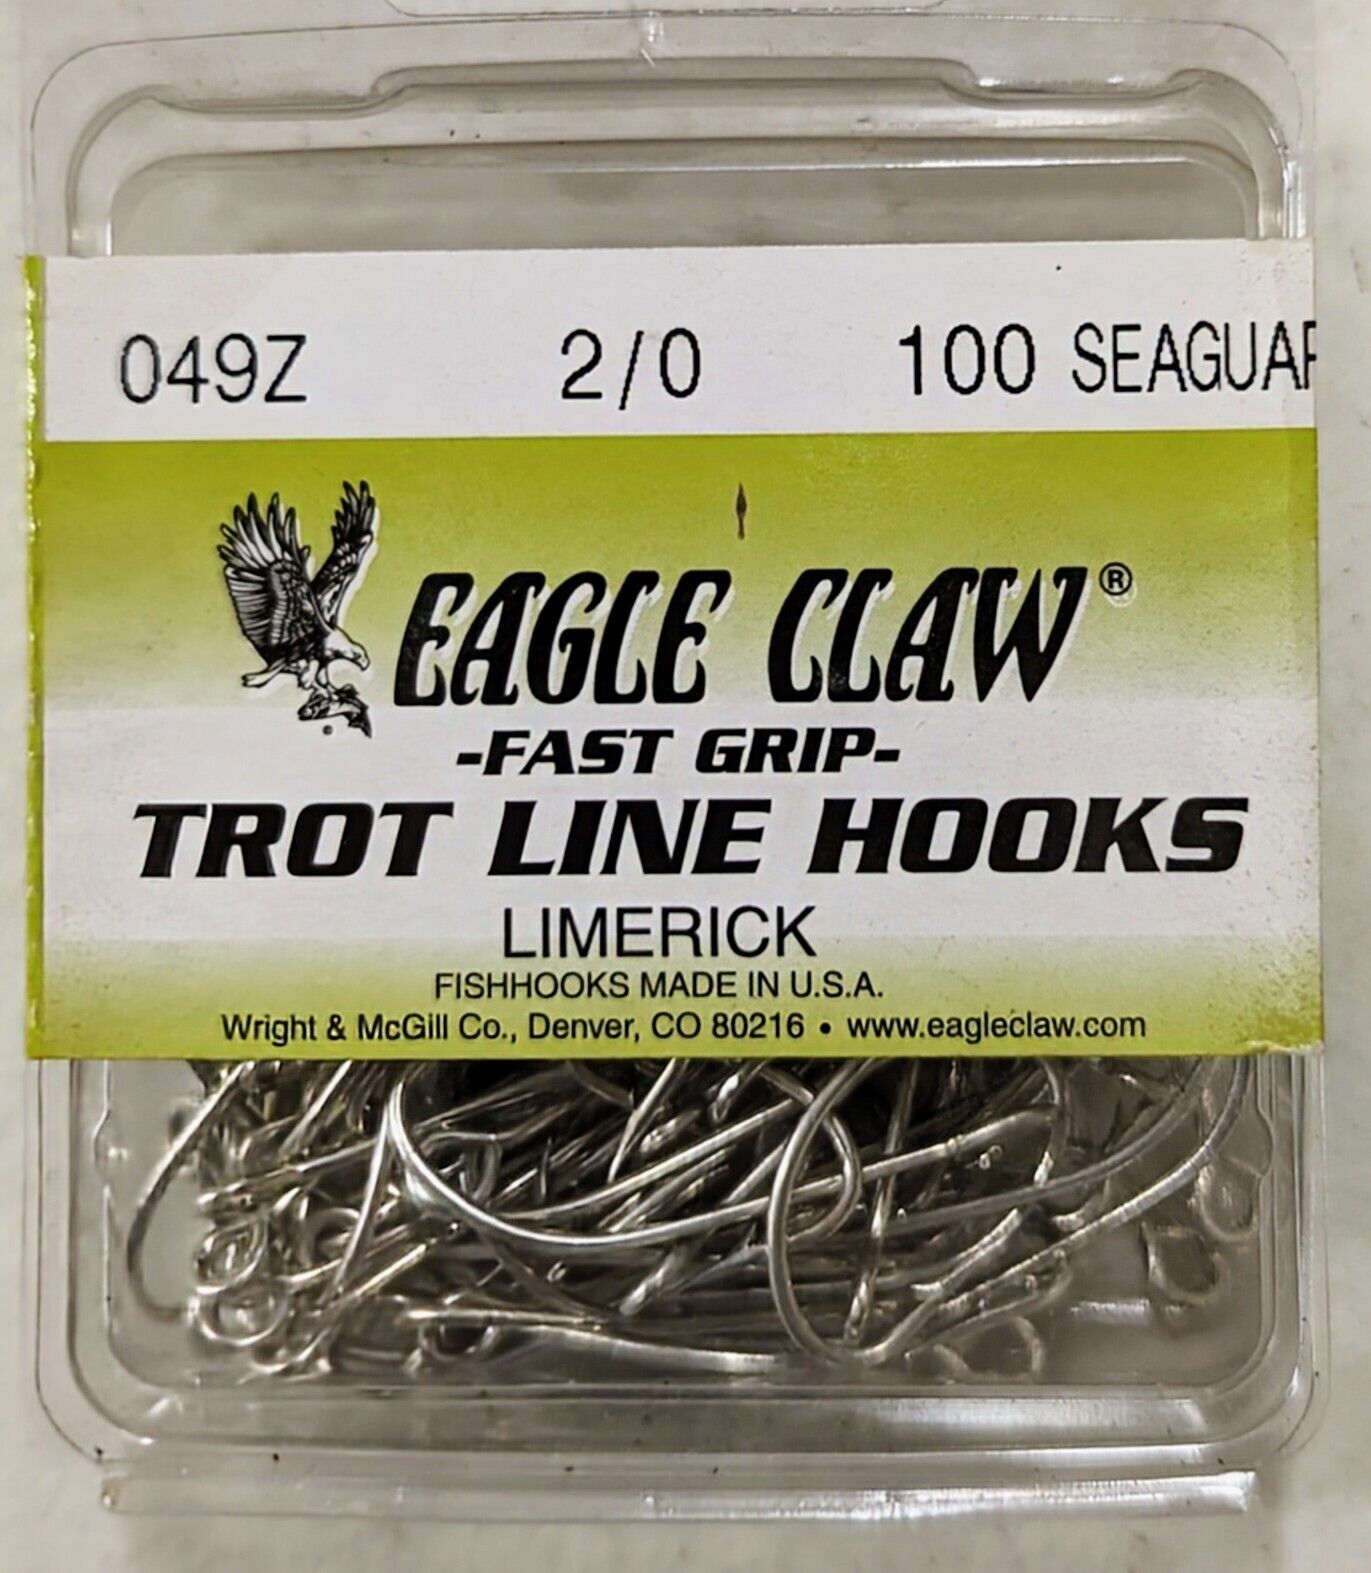 Eagle Claw 049Z Fast Grip Trot Line Hooks Limerick 100 count - CHOOSE SIZE